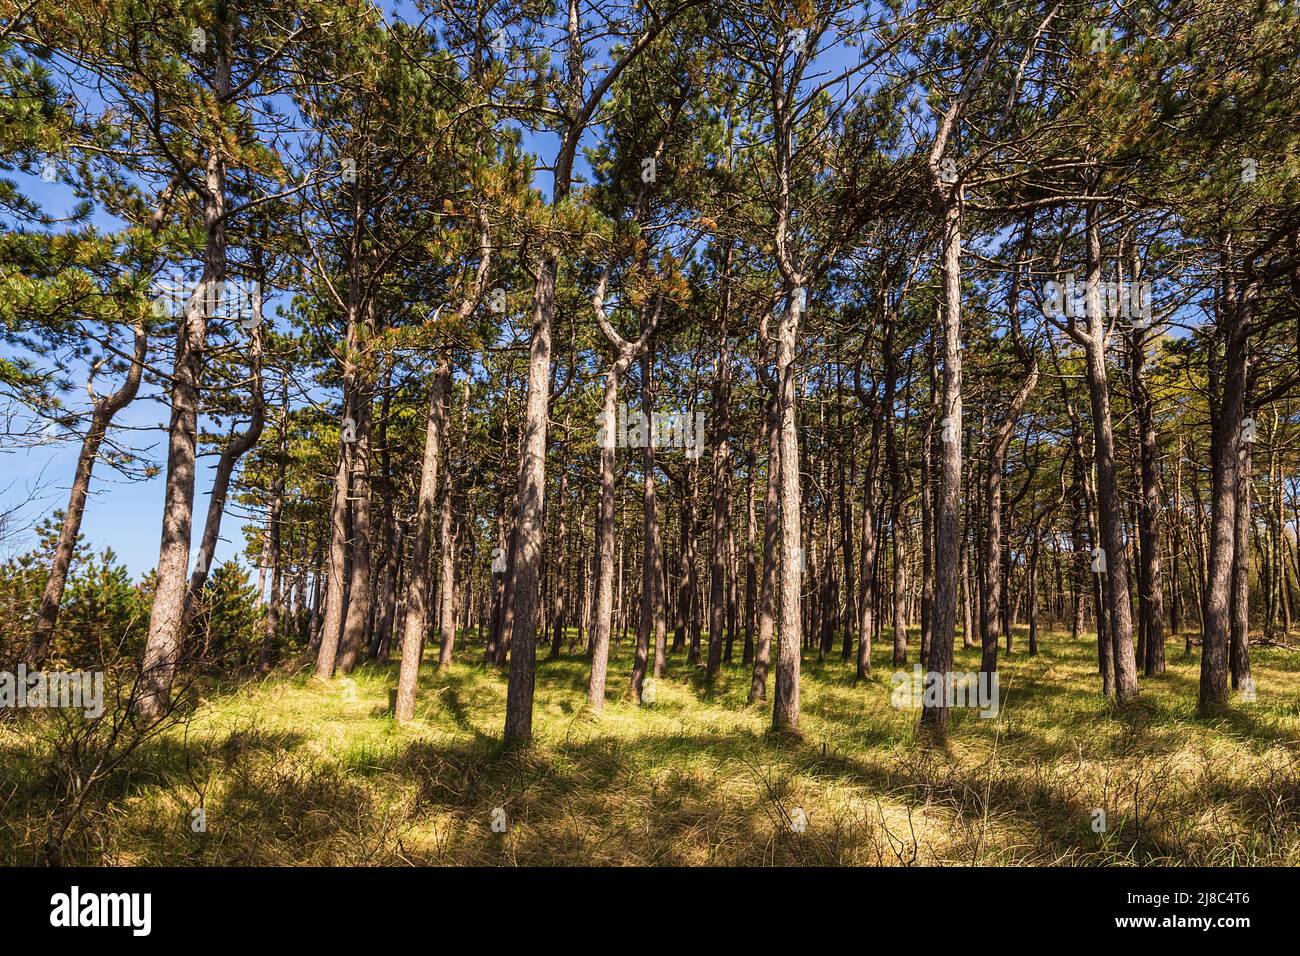 Coastal forest in Neuendorf on the island Hiddensee, Germany. Stock Photo